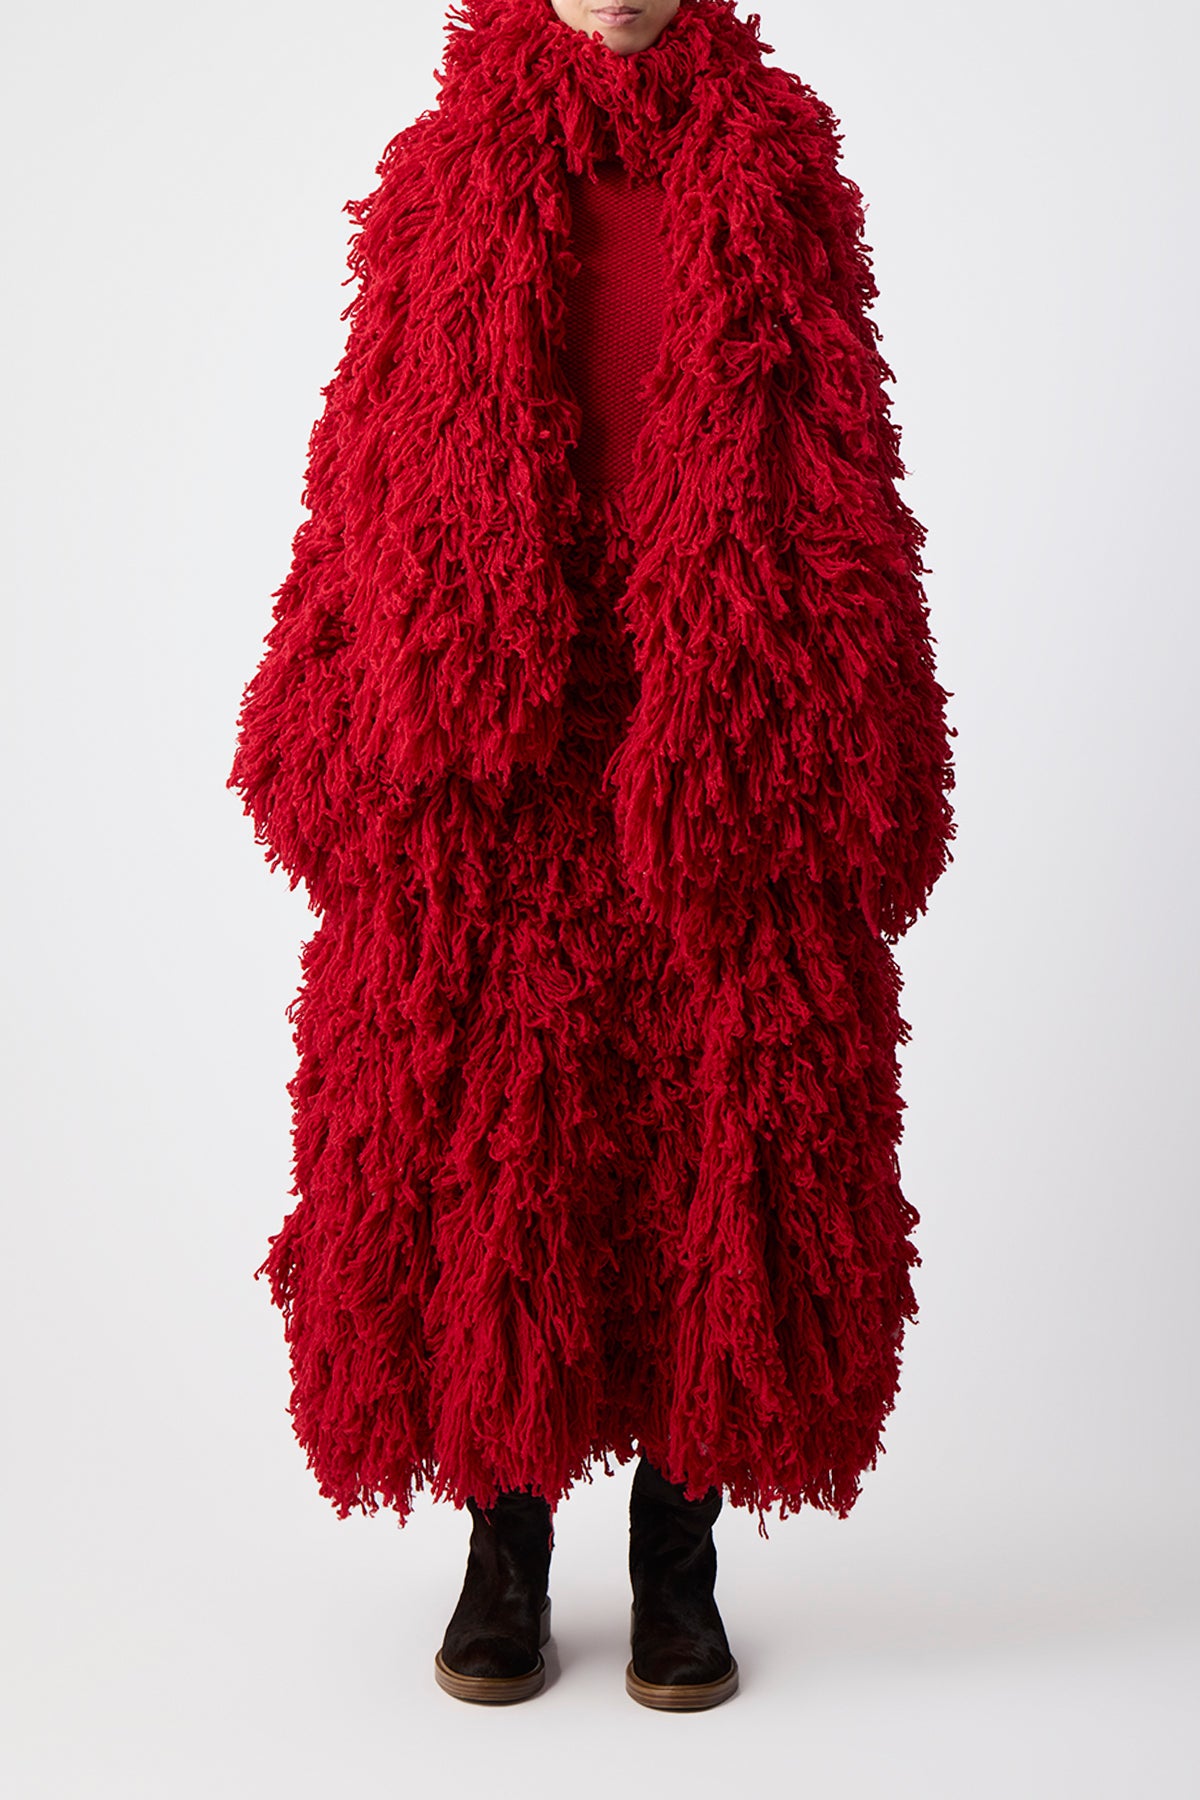 Hargreaves Knit Scarf in Scarlet Red Virgin Wool Cashmere Silk